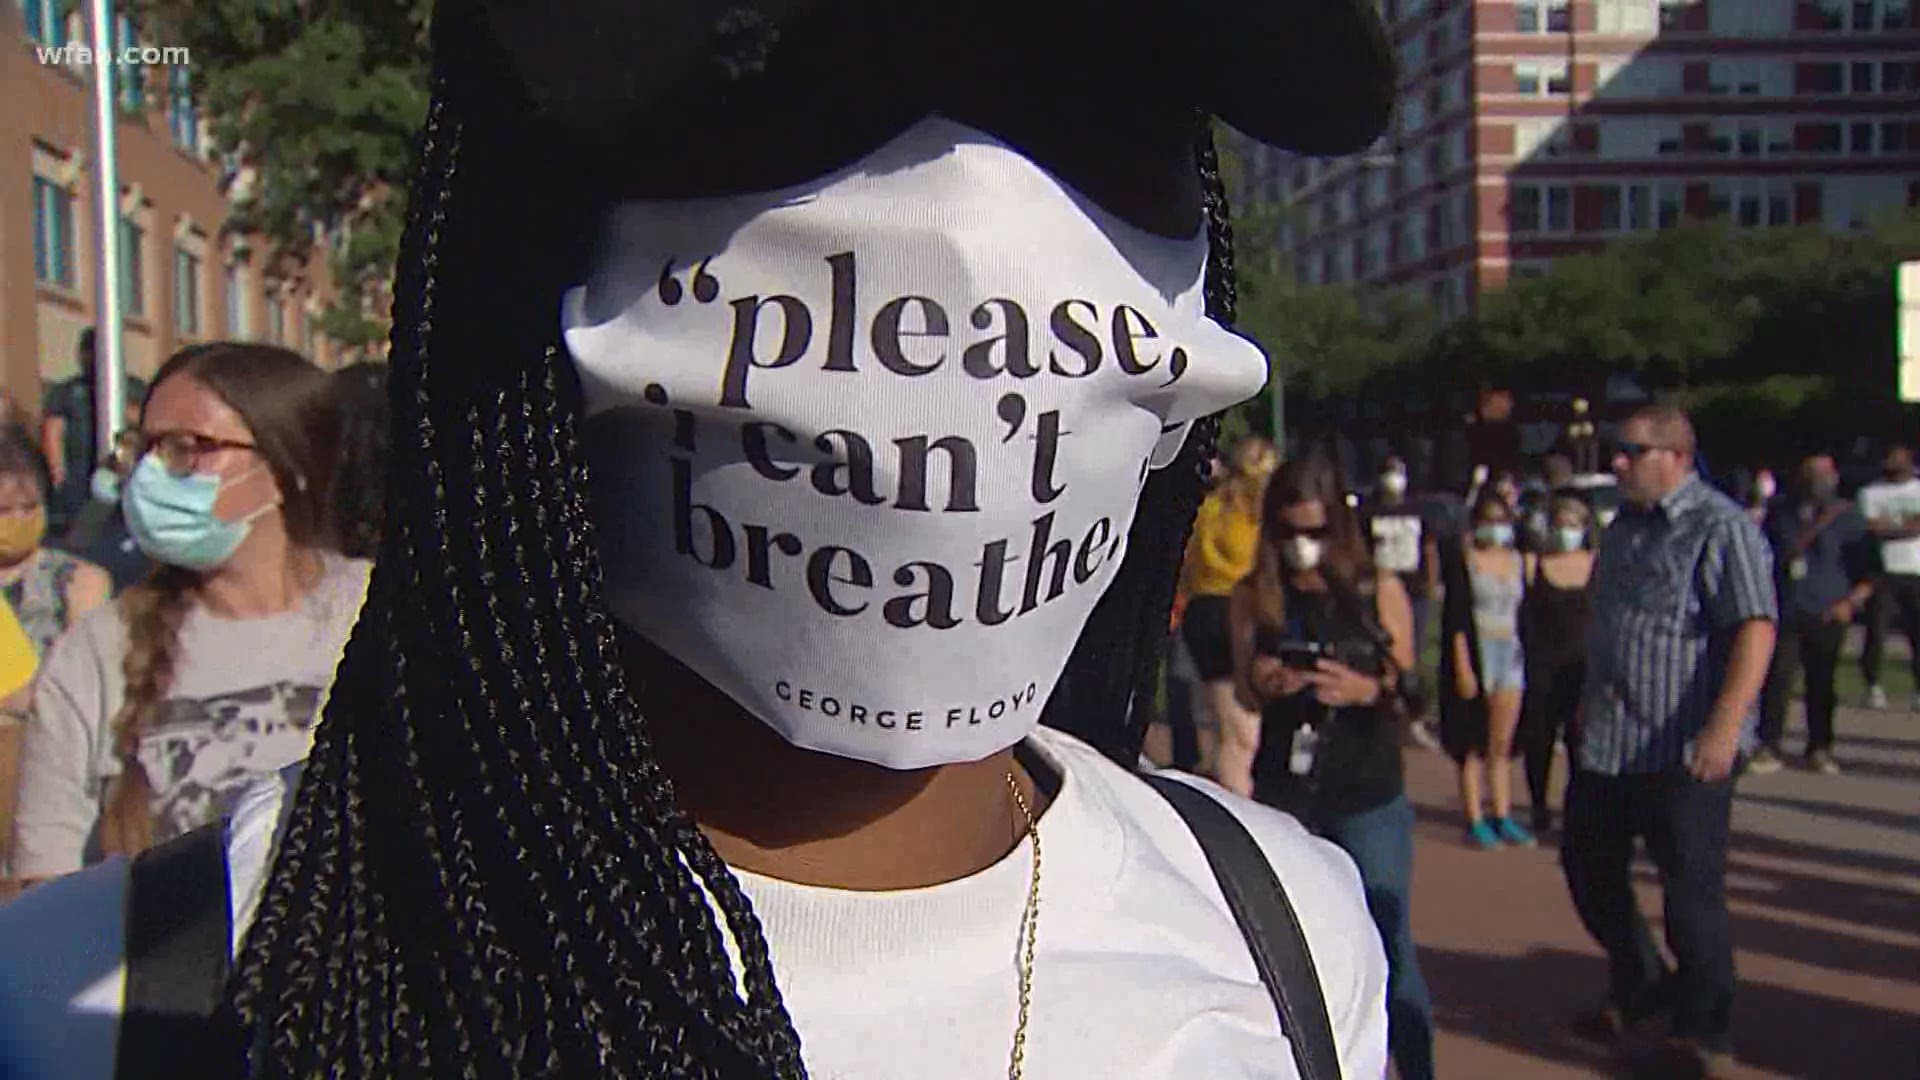 Hundreds of people gathered in Dallas to call for justice on Friday. What began as a peaceful protest devolved into damage and looting early Saturday.